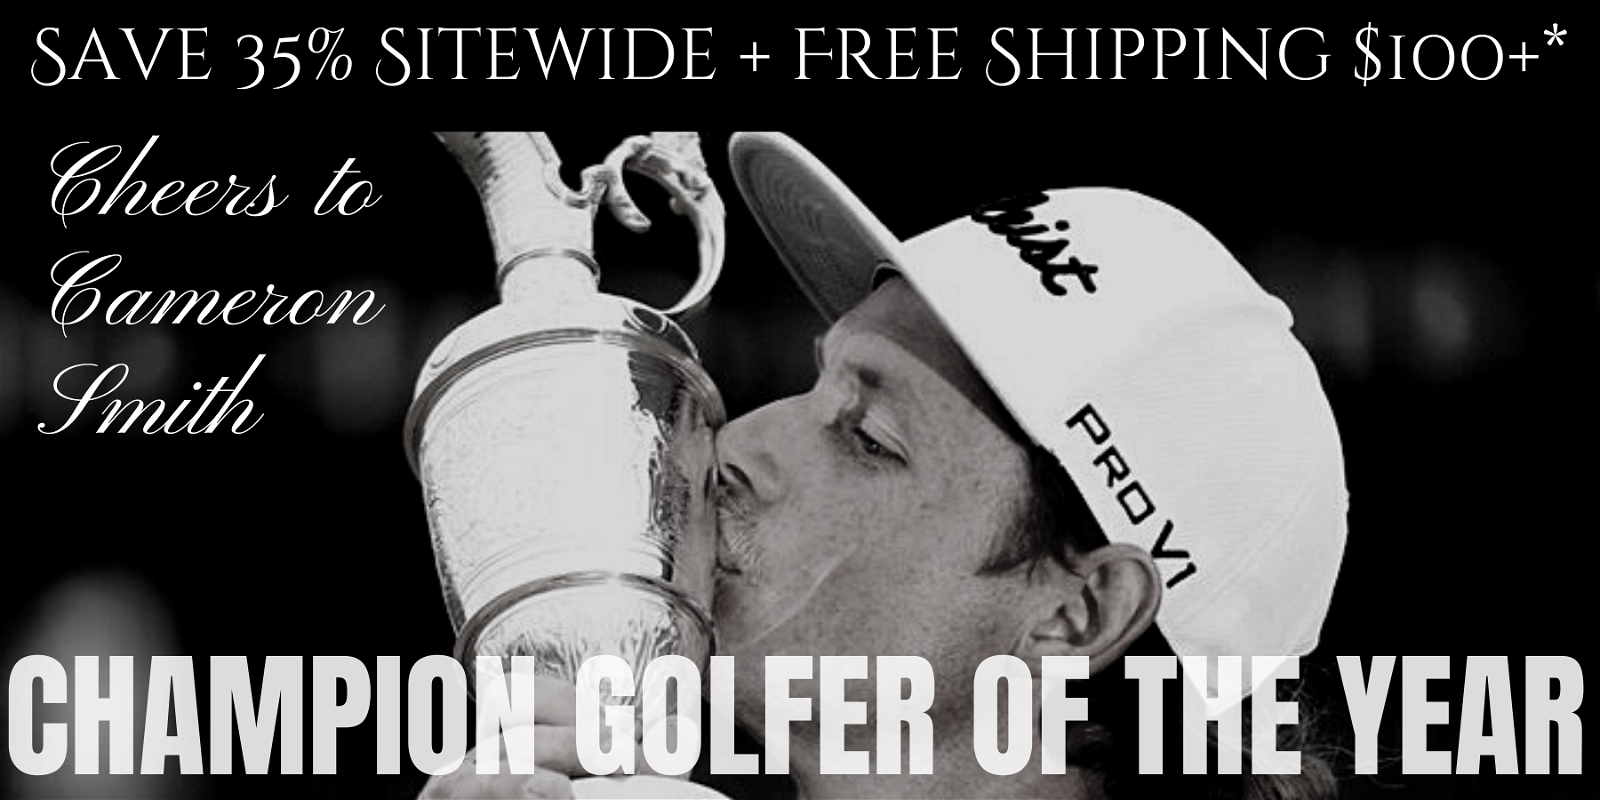 Save 35% Sitewide + Free Shipping $100+ and Commemorate the World's Oldest Golf Tournament, the 150th Open Championship, today! Click here to shop now.